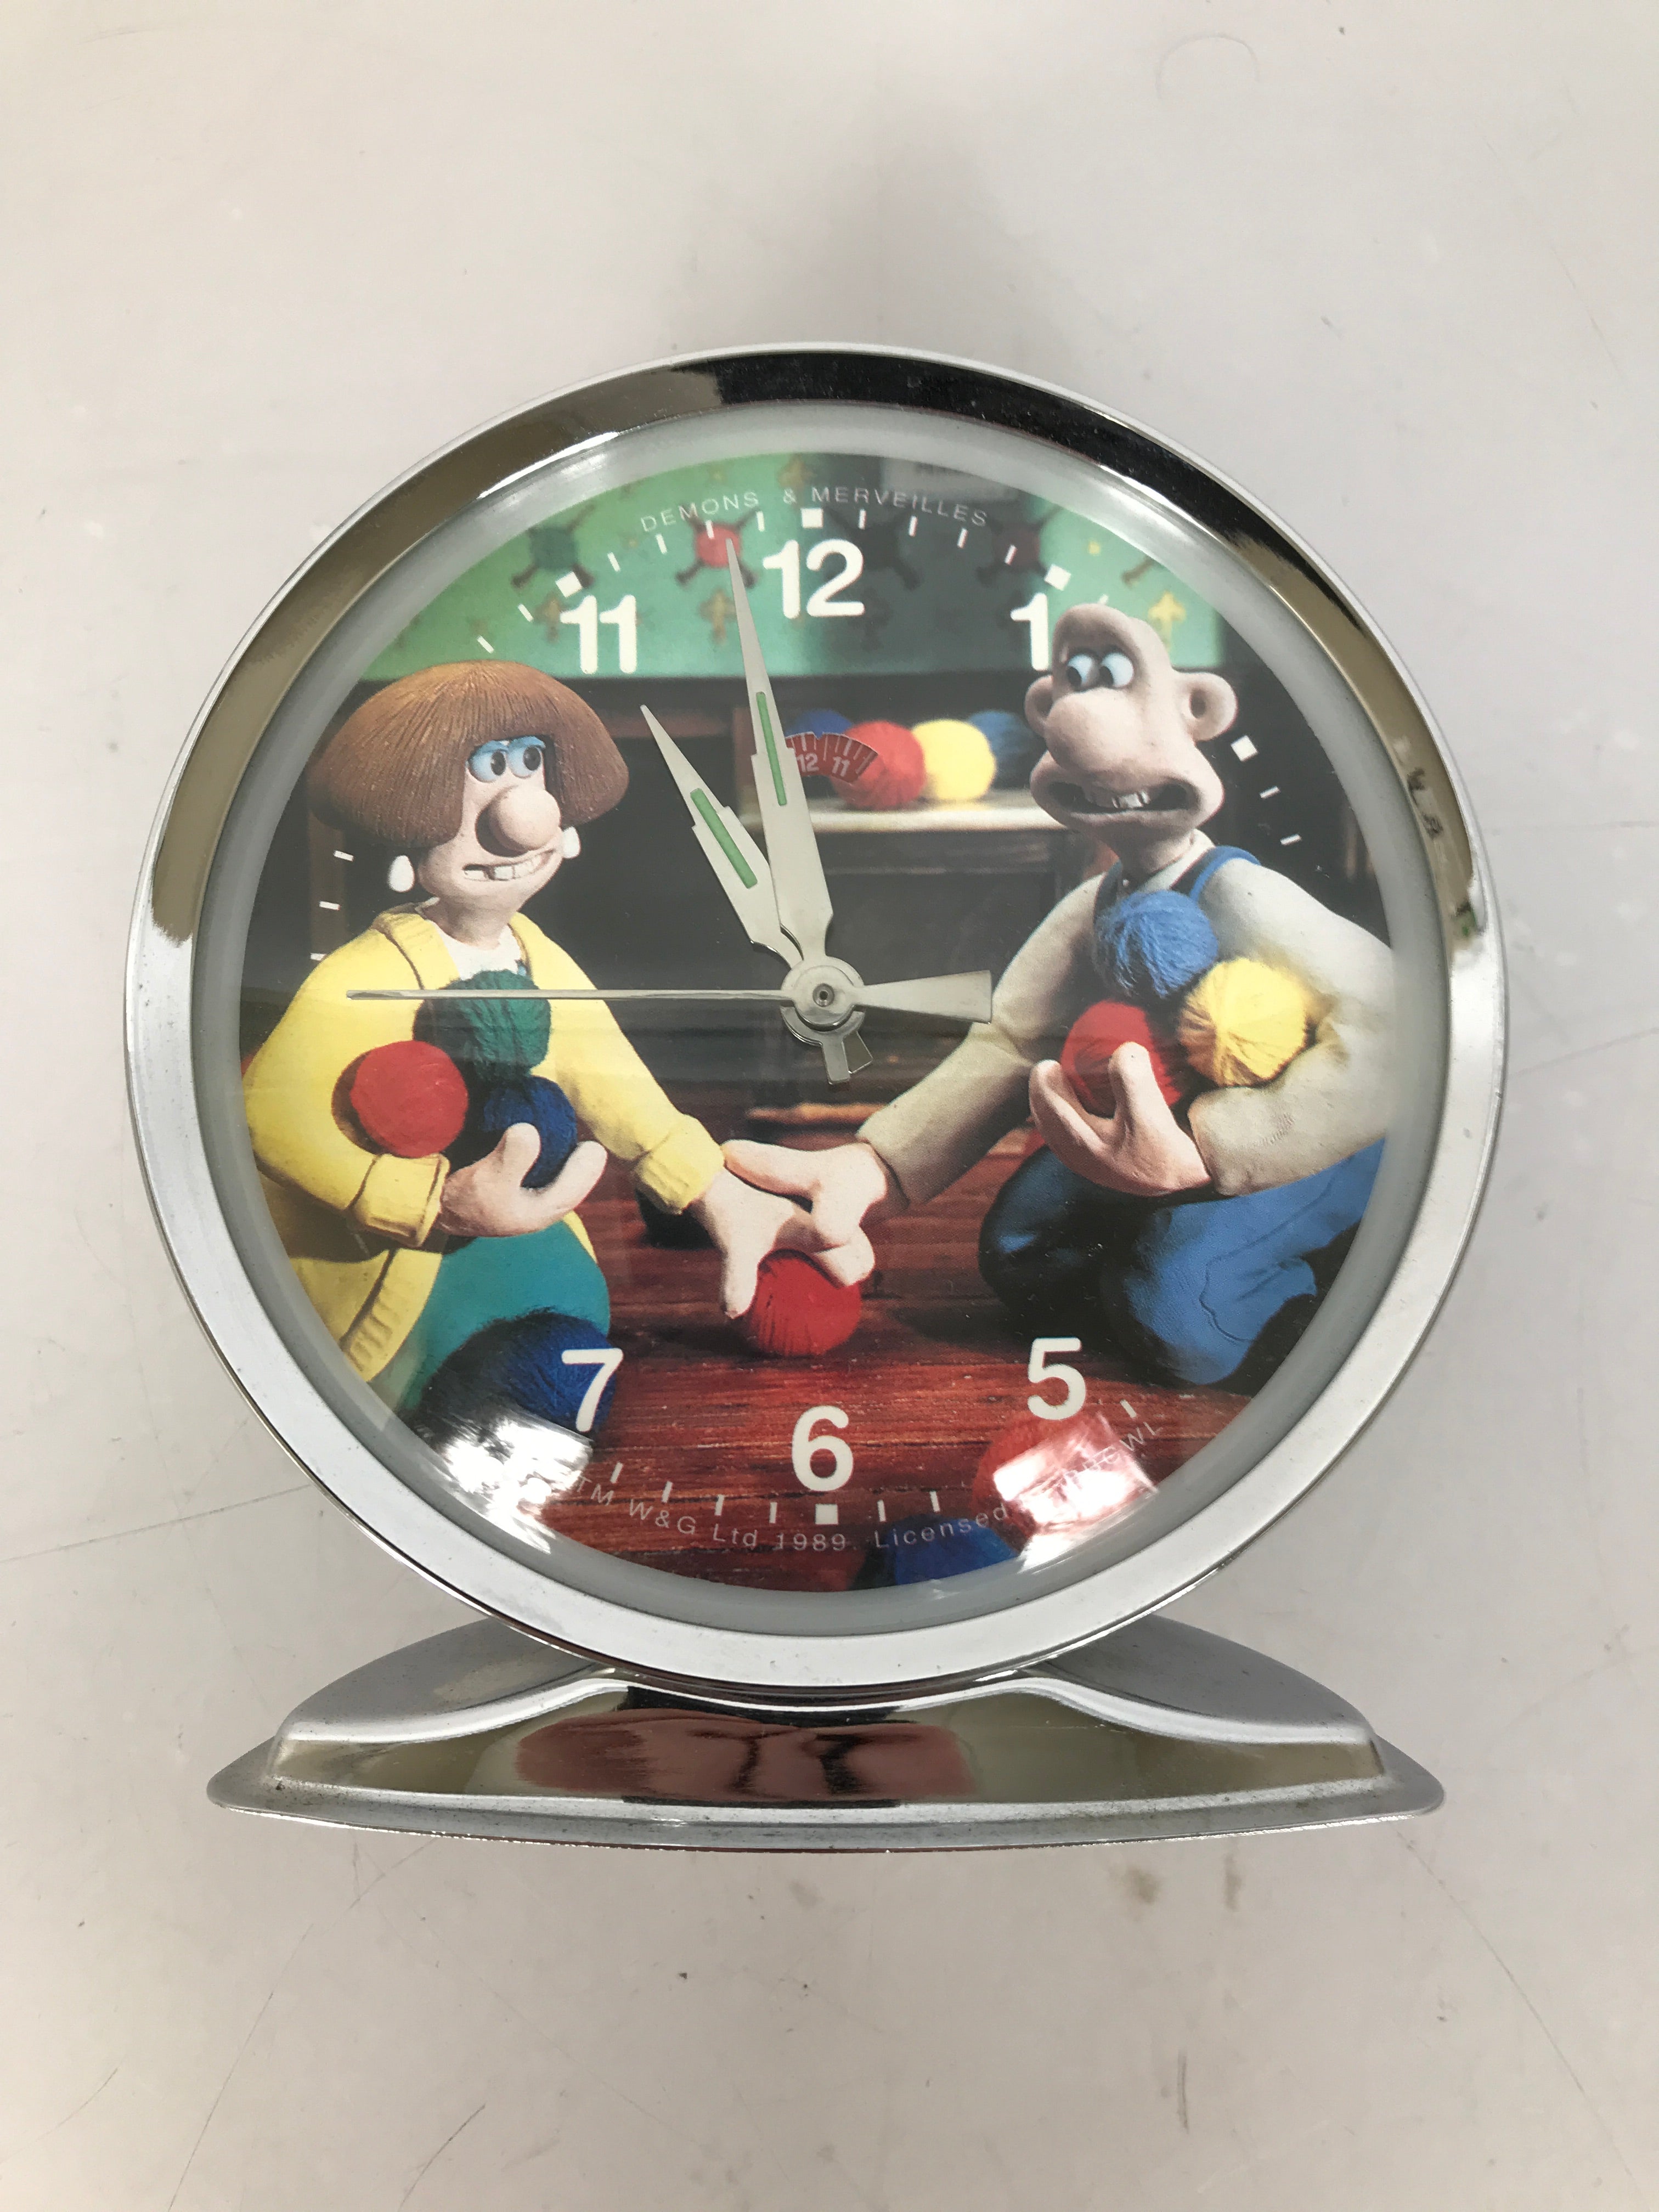 Vintage 1989 Demons & Merveilles Alarm Clock Wallace and Gromit *For Parts or Repair*